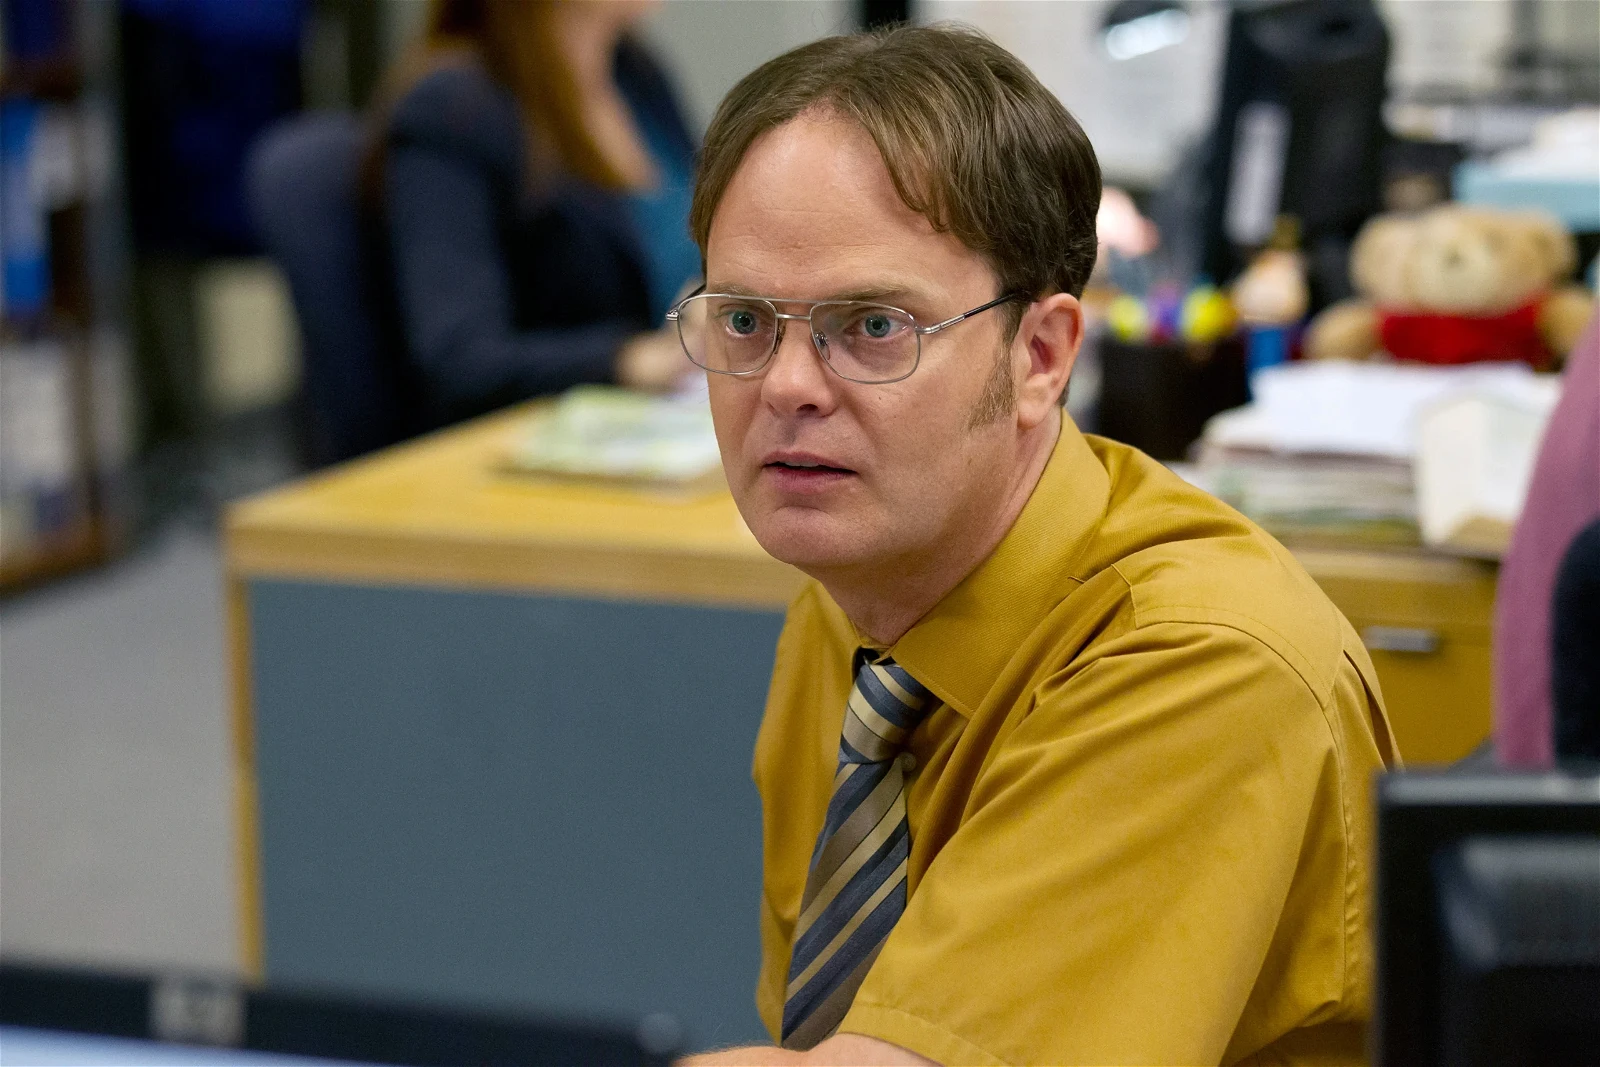 Rain Wilson as Dwight Schrute in a still from The Office